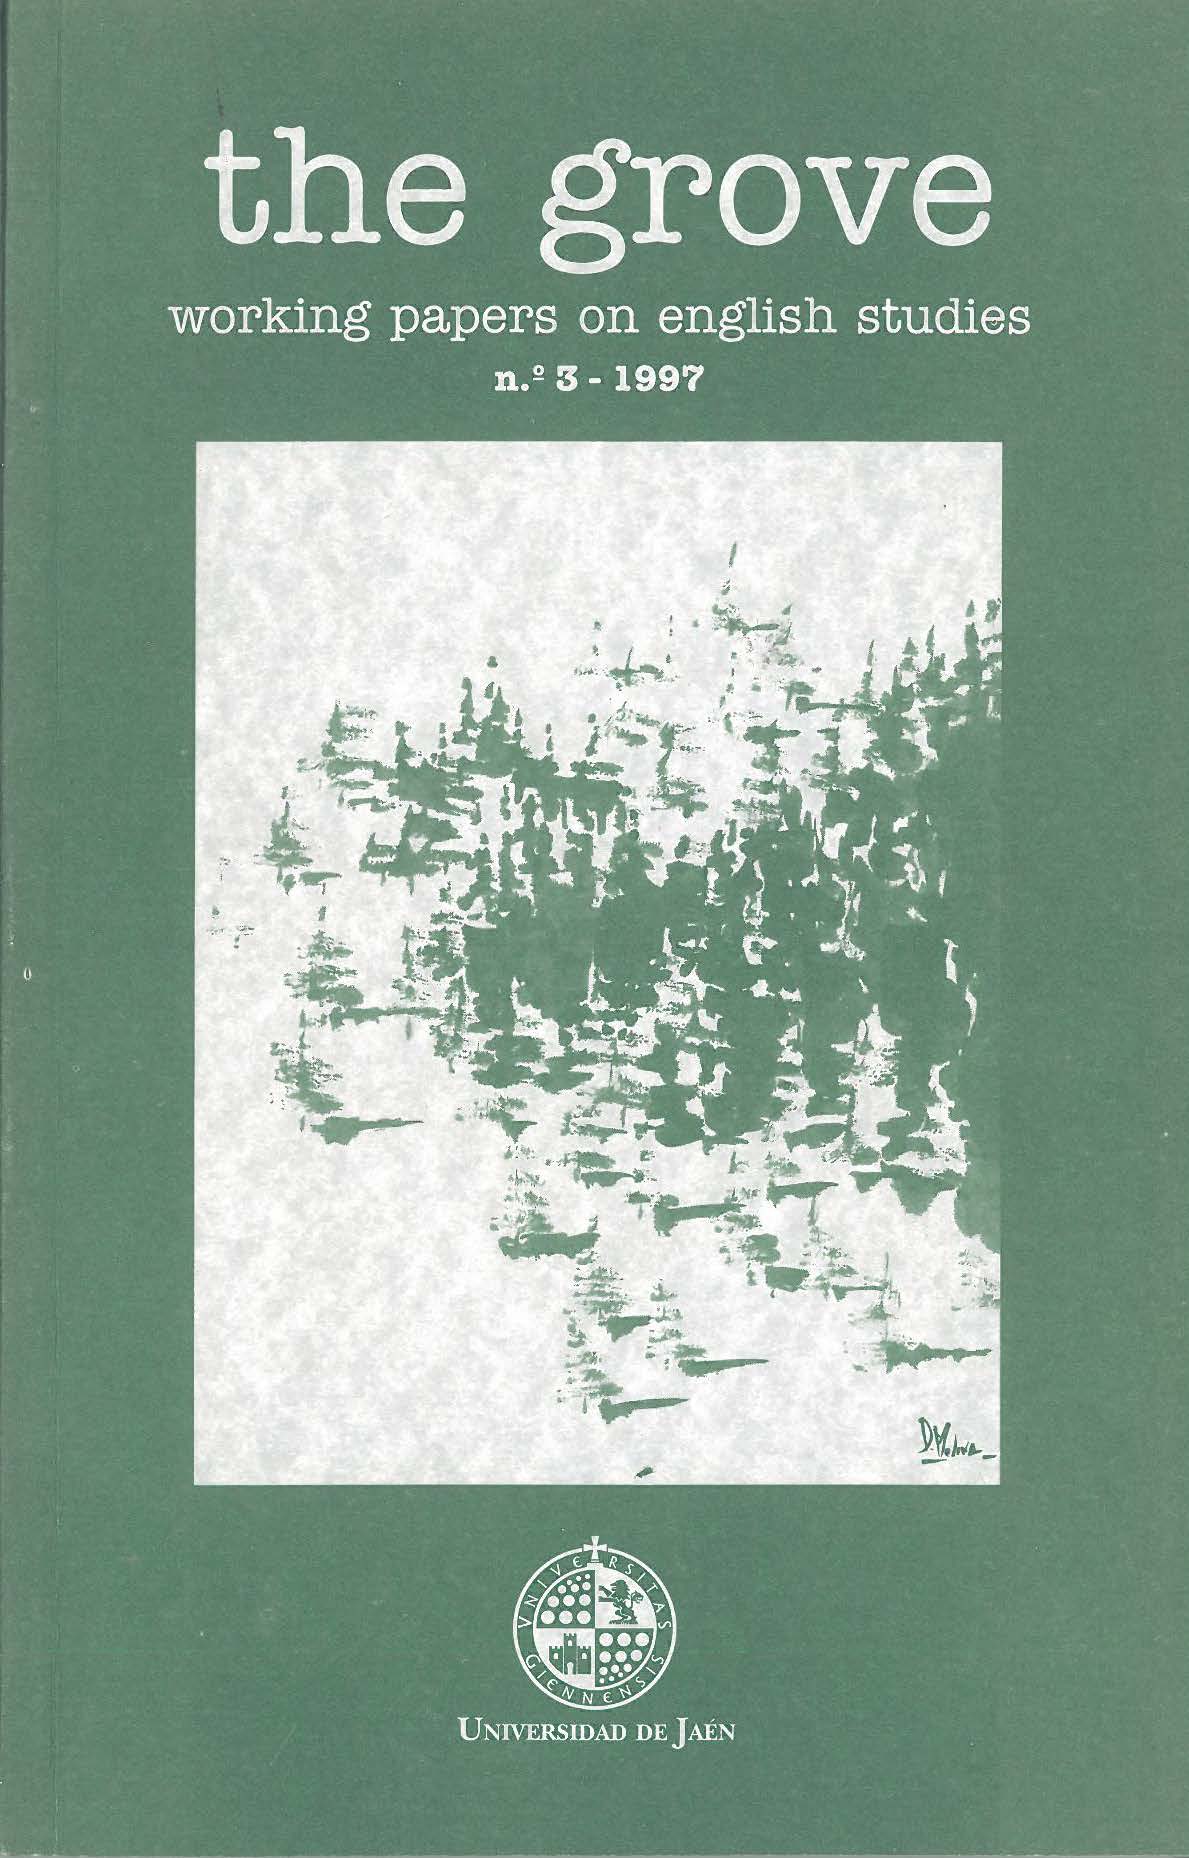 					View Vol. 3 (1997): The Grove. Working Papers on english studies
				